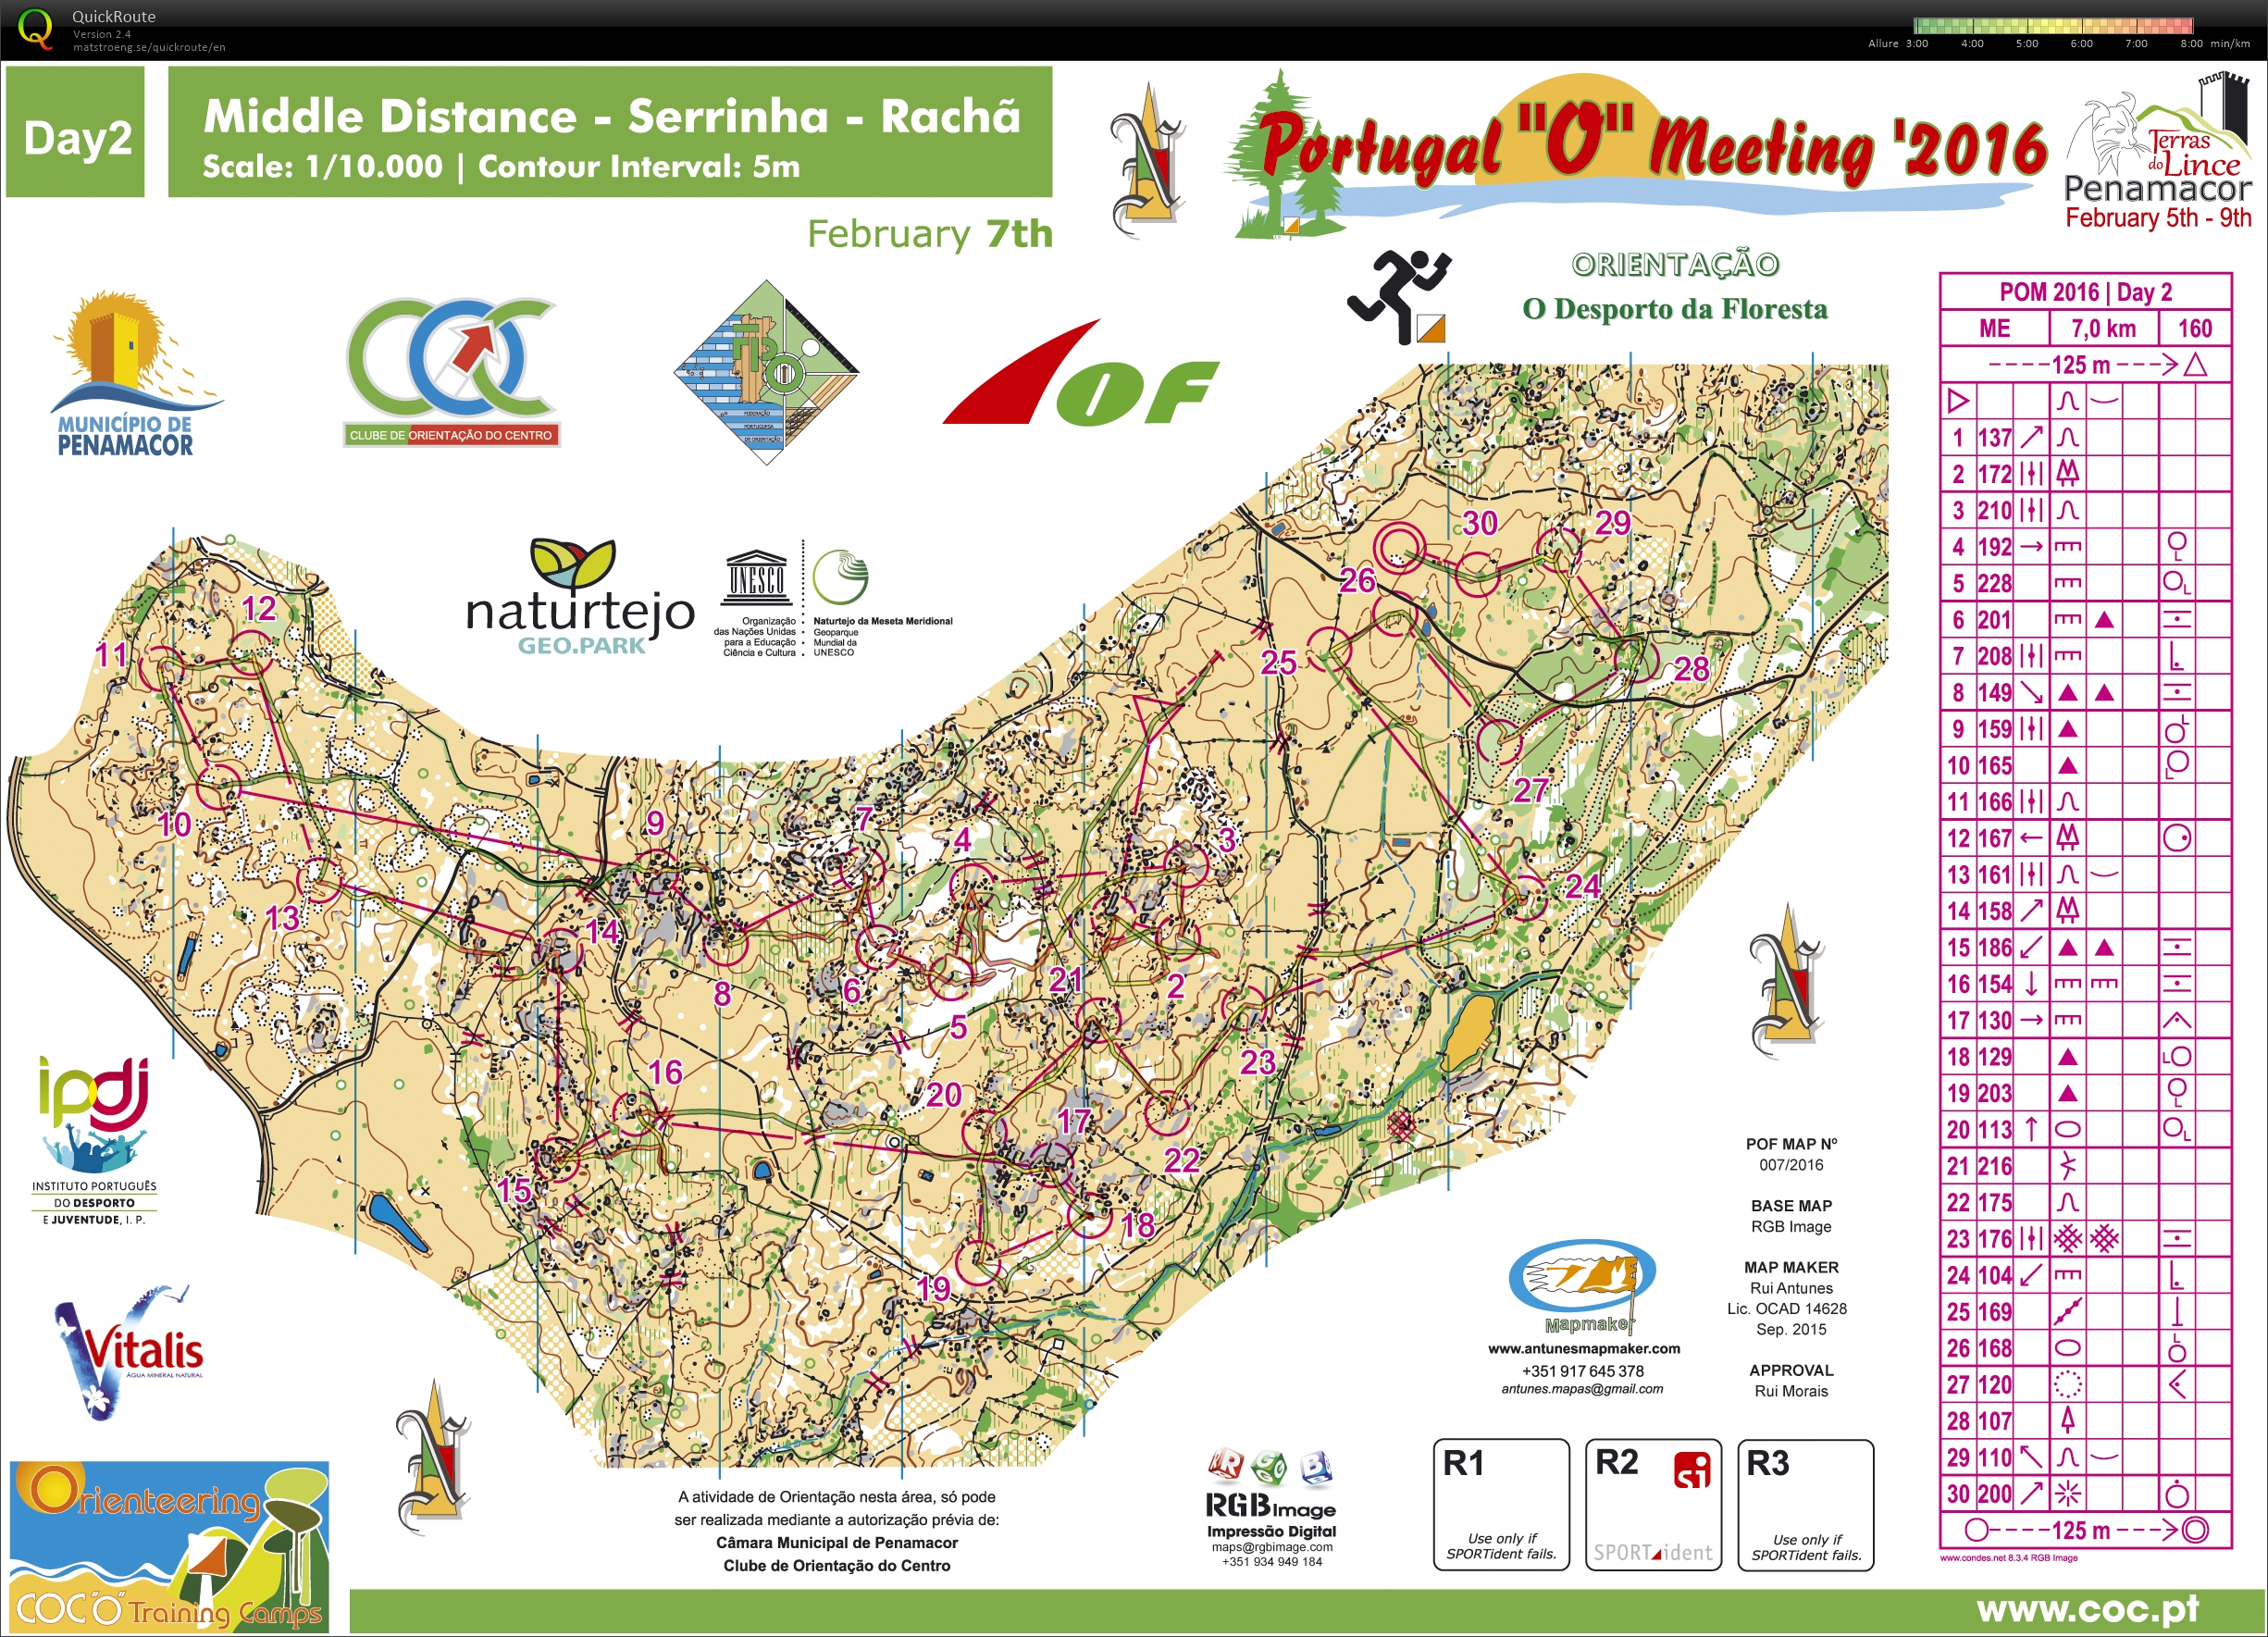 Portugal O Meeting Stage 2 (07/02/2016)